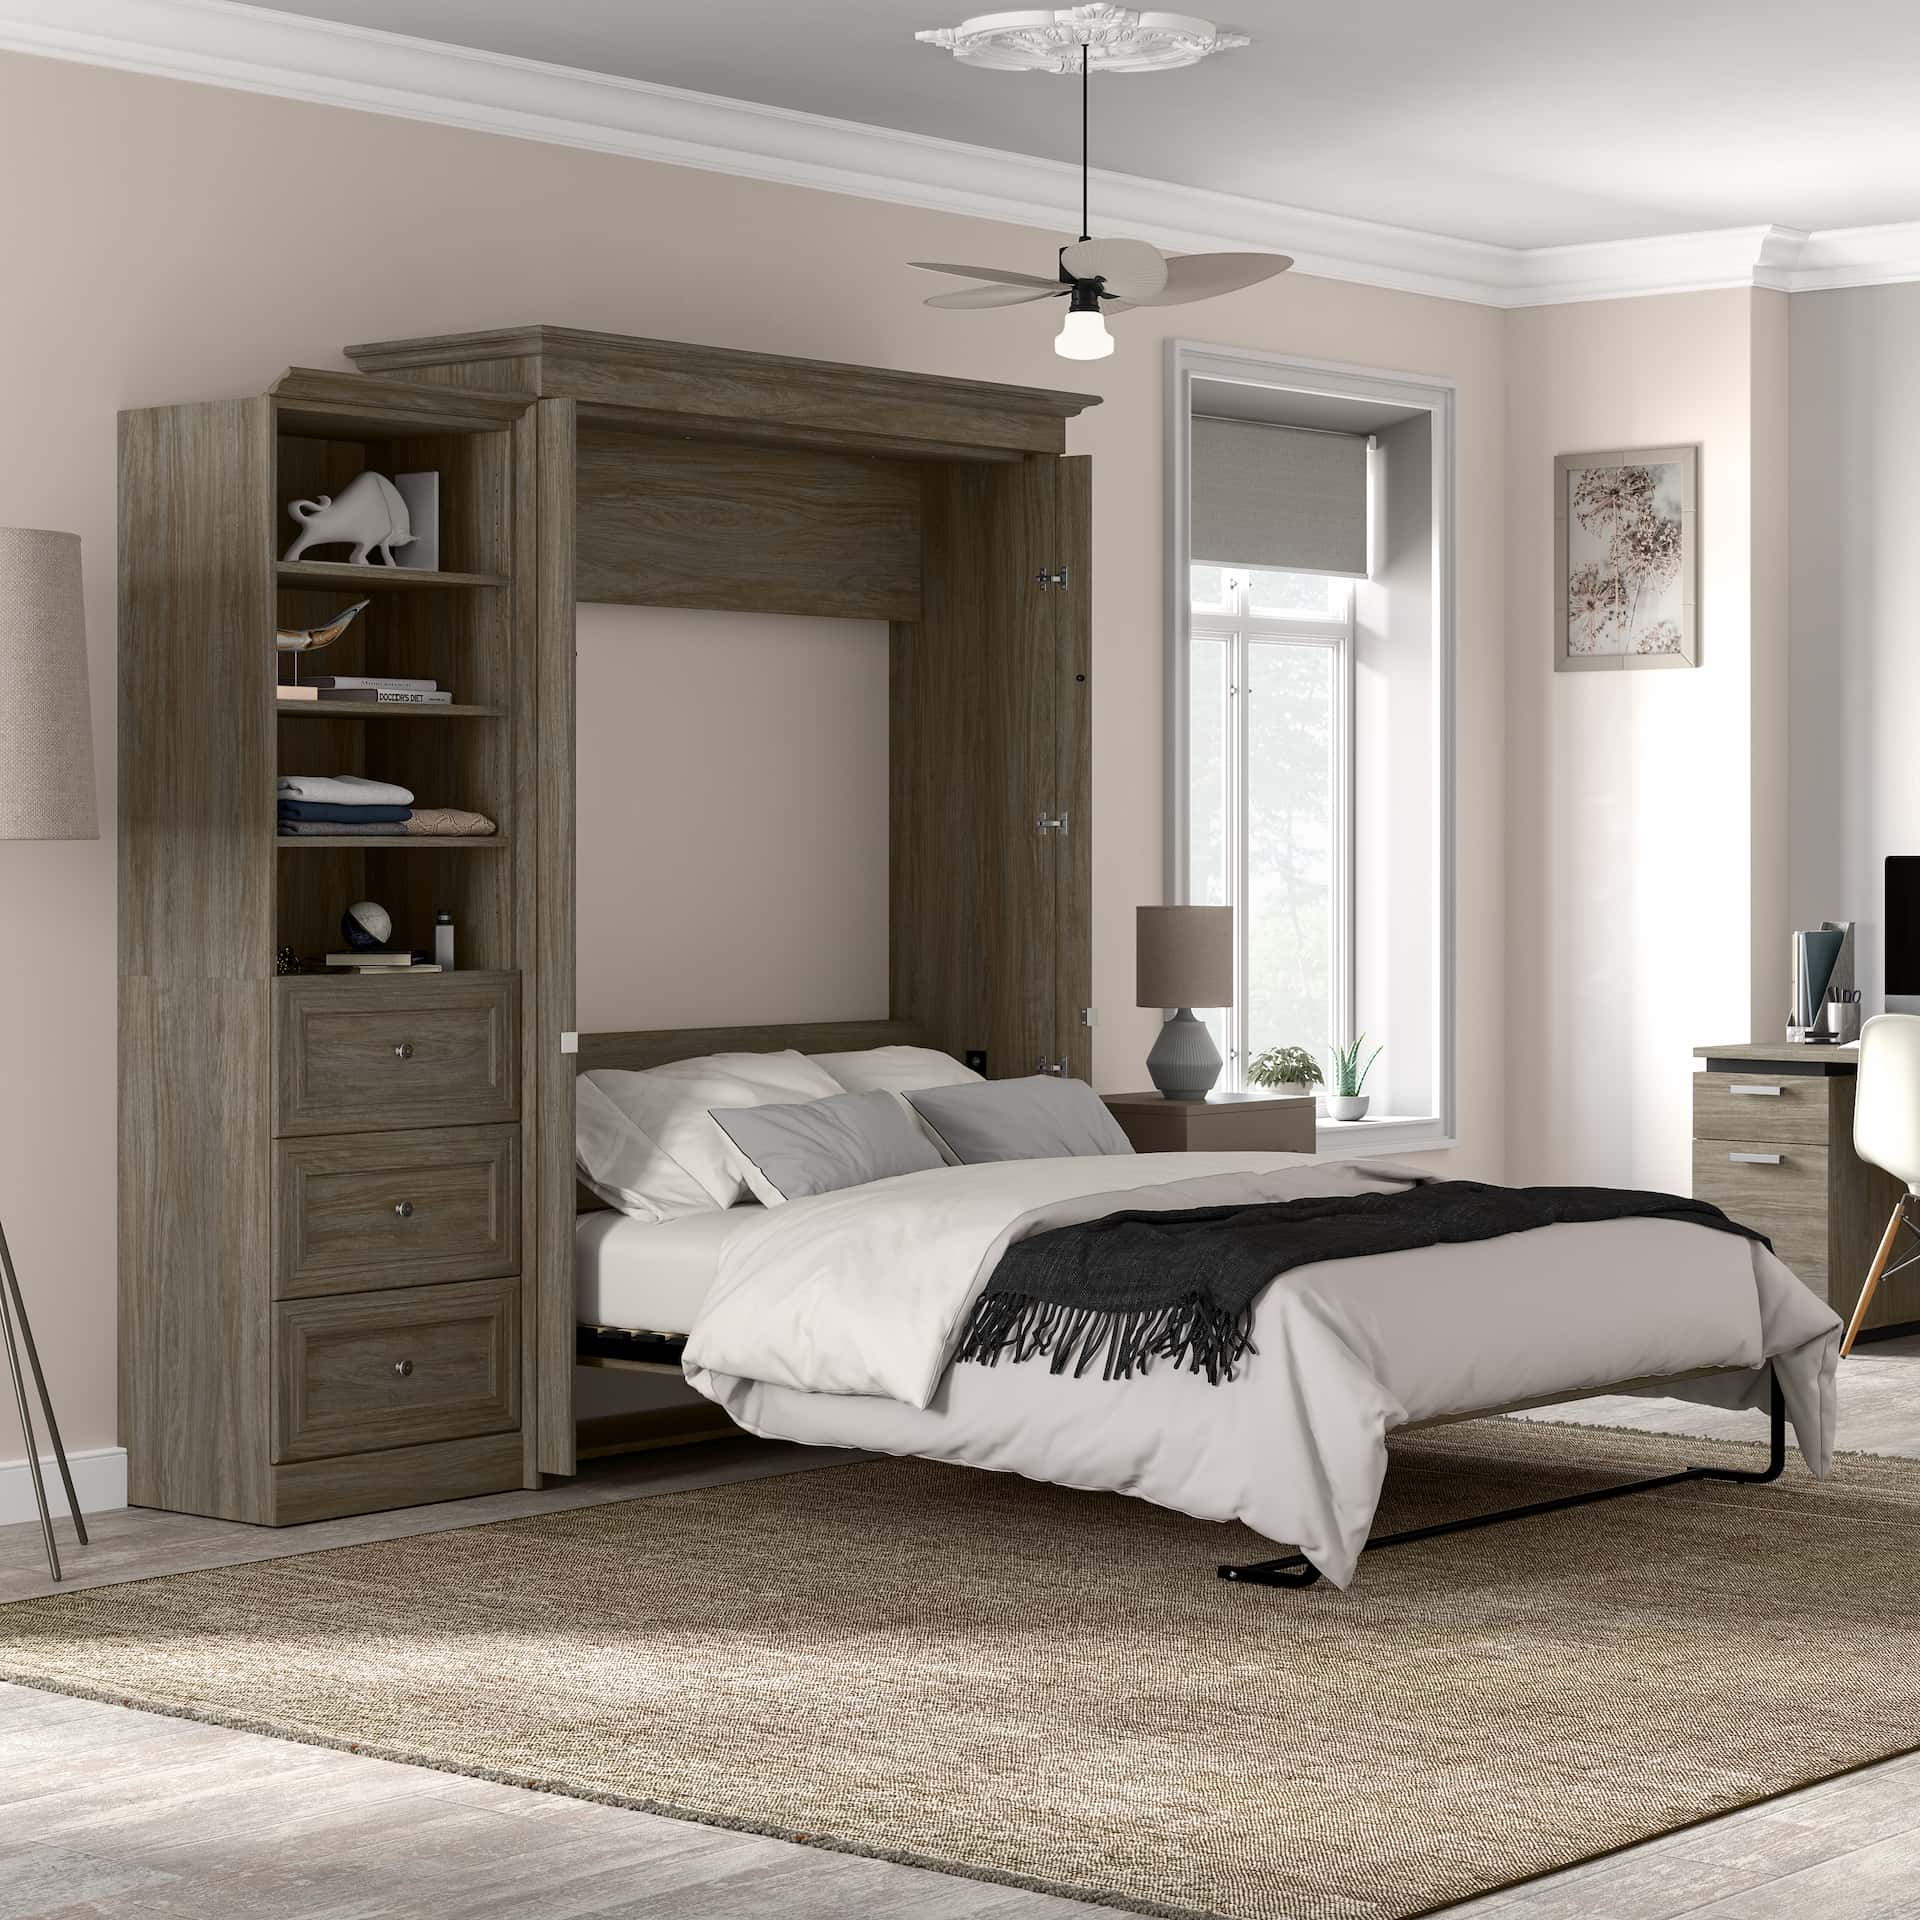 Beautiful multifunctional guest room with a Bestar Murphy bed